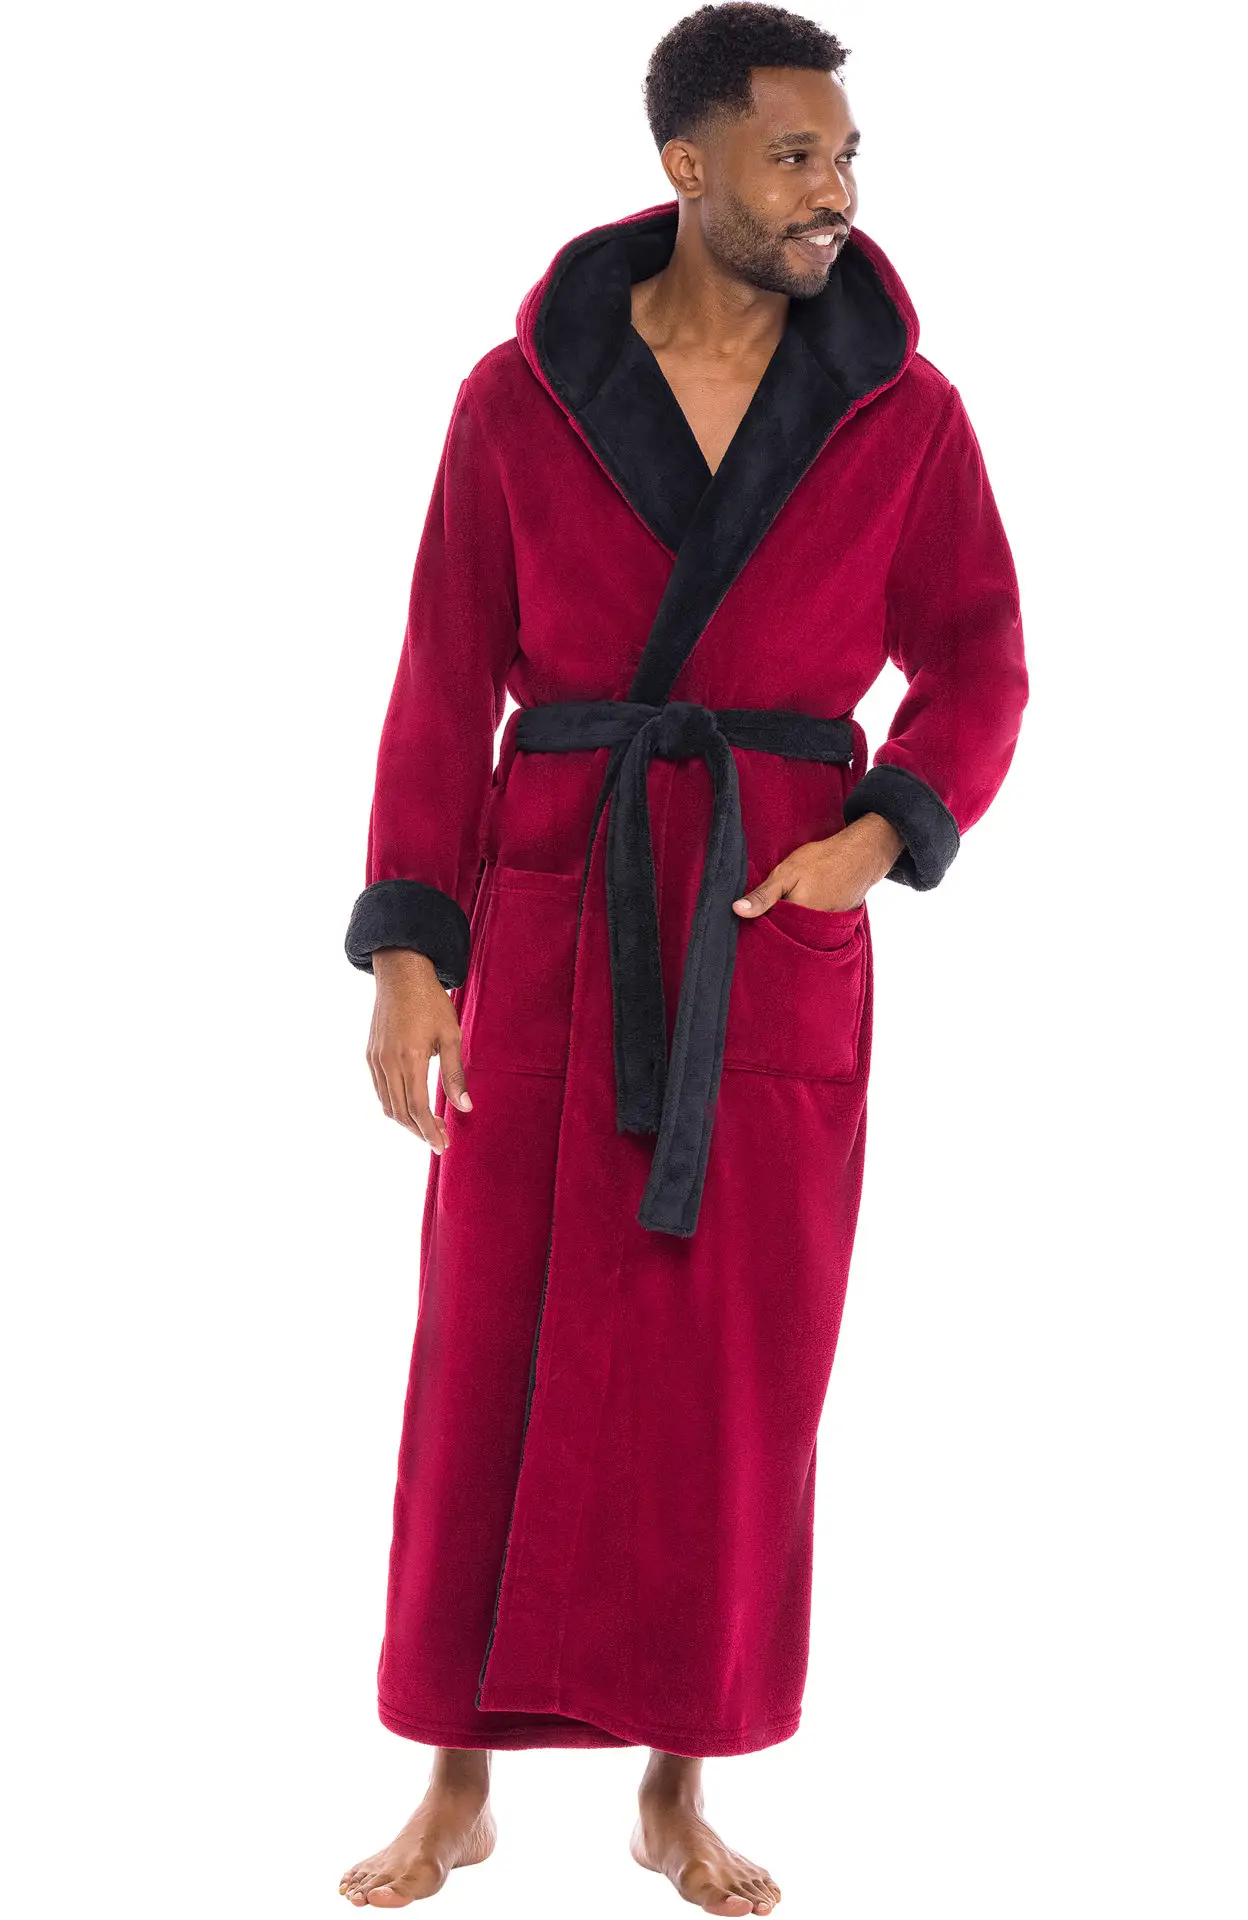 red fleece robe valentine's day gift ideas for him